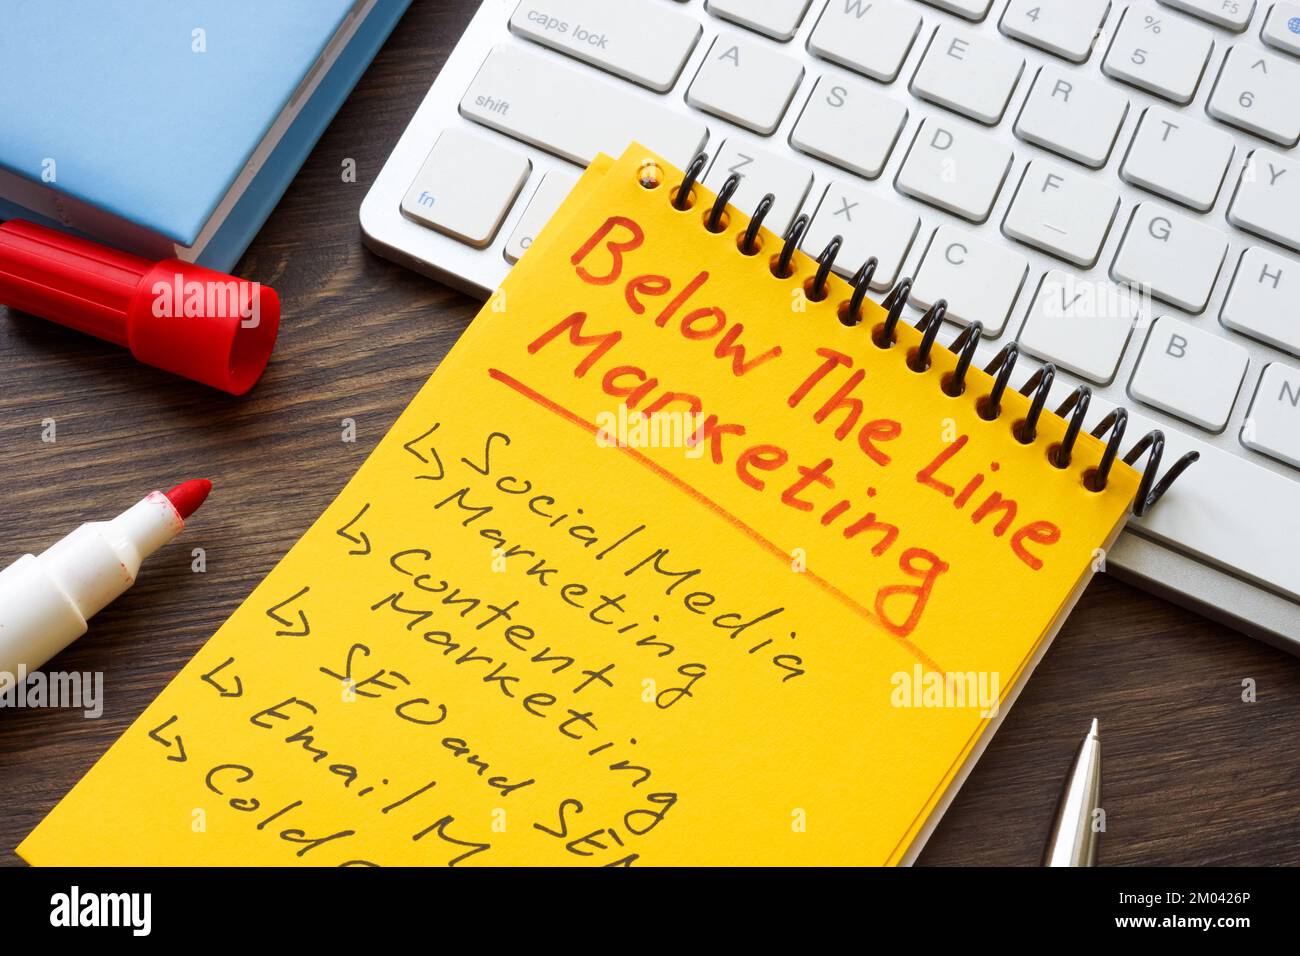 Marks about Below the line BTL marketing in the yellow notepad. Stock Photo